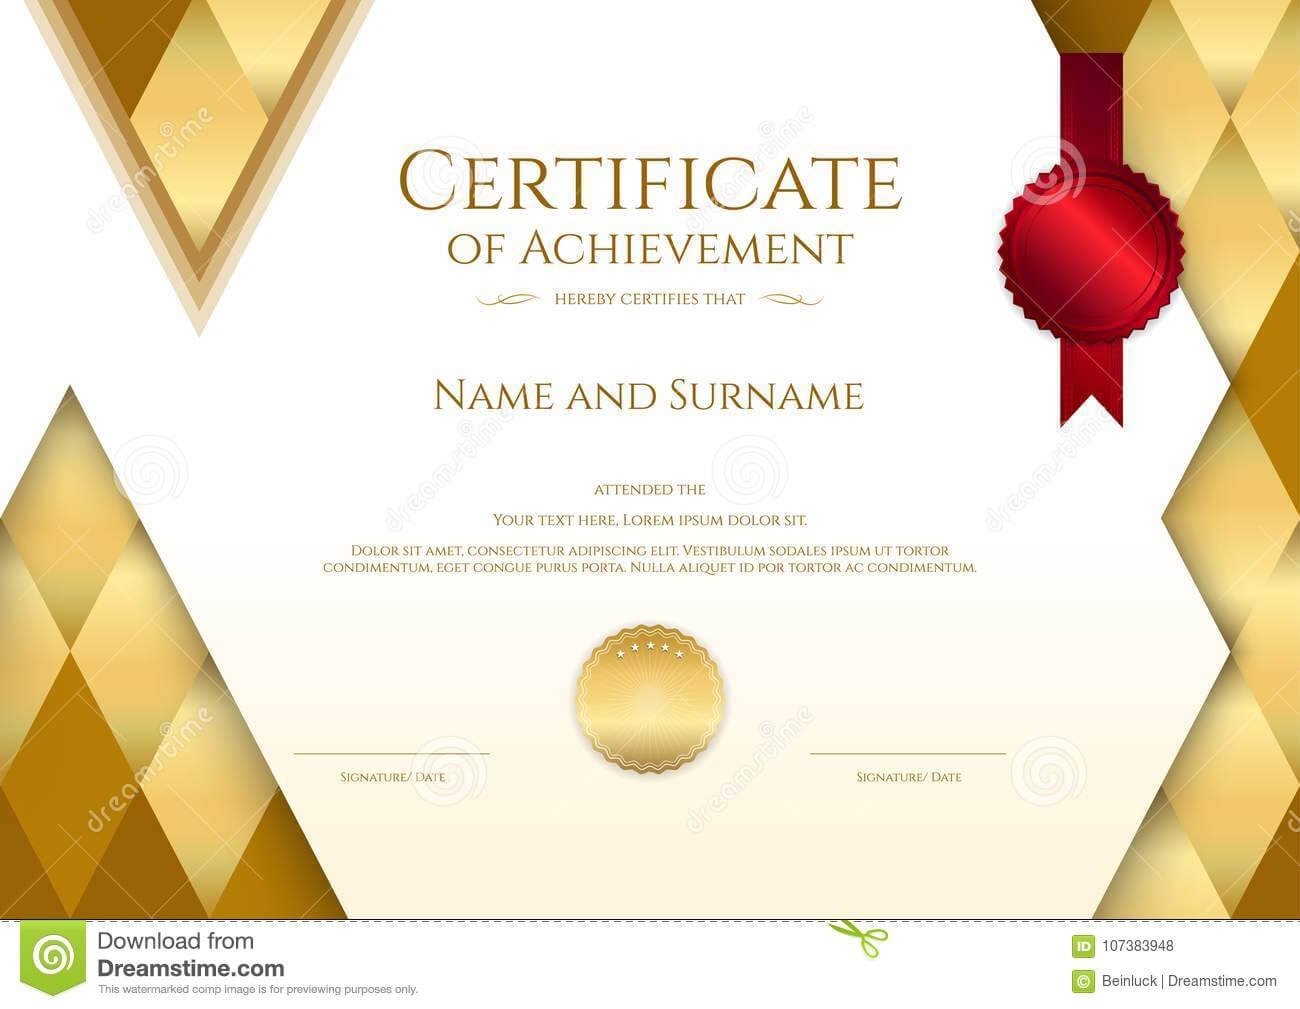 Luxury Certificate Template With Elegant Border Frame Inside Certificate Border Design Templates